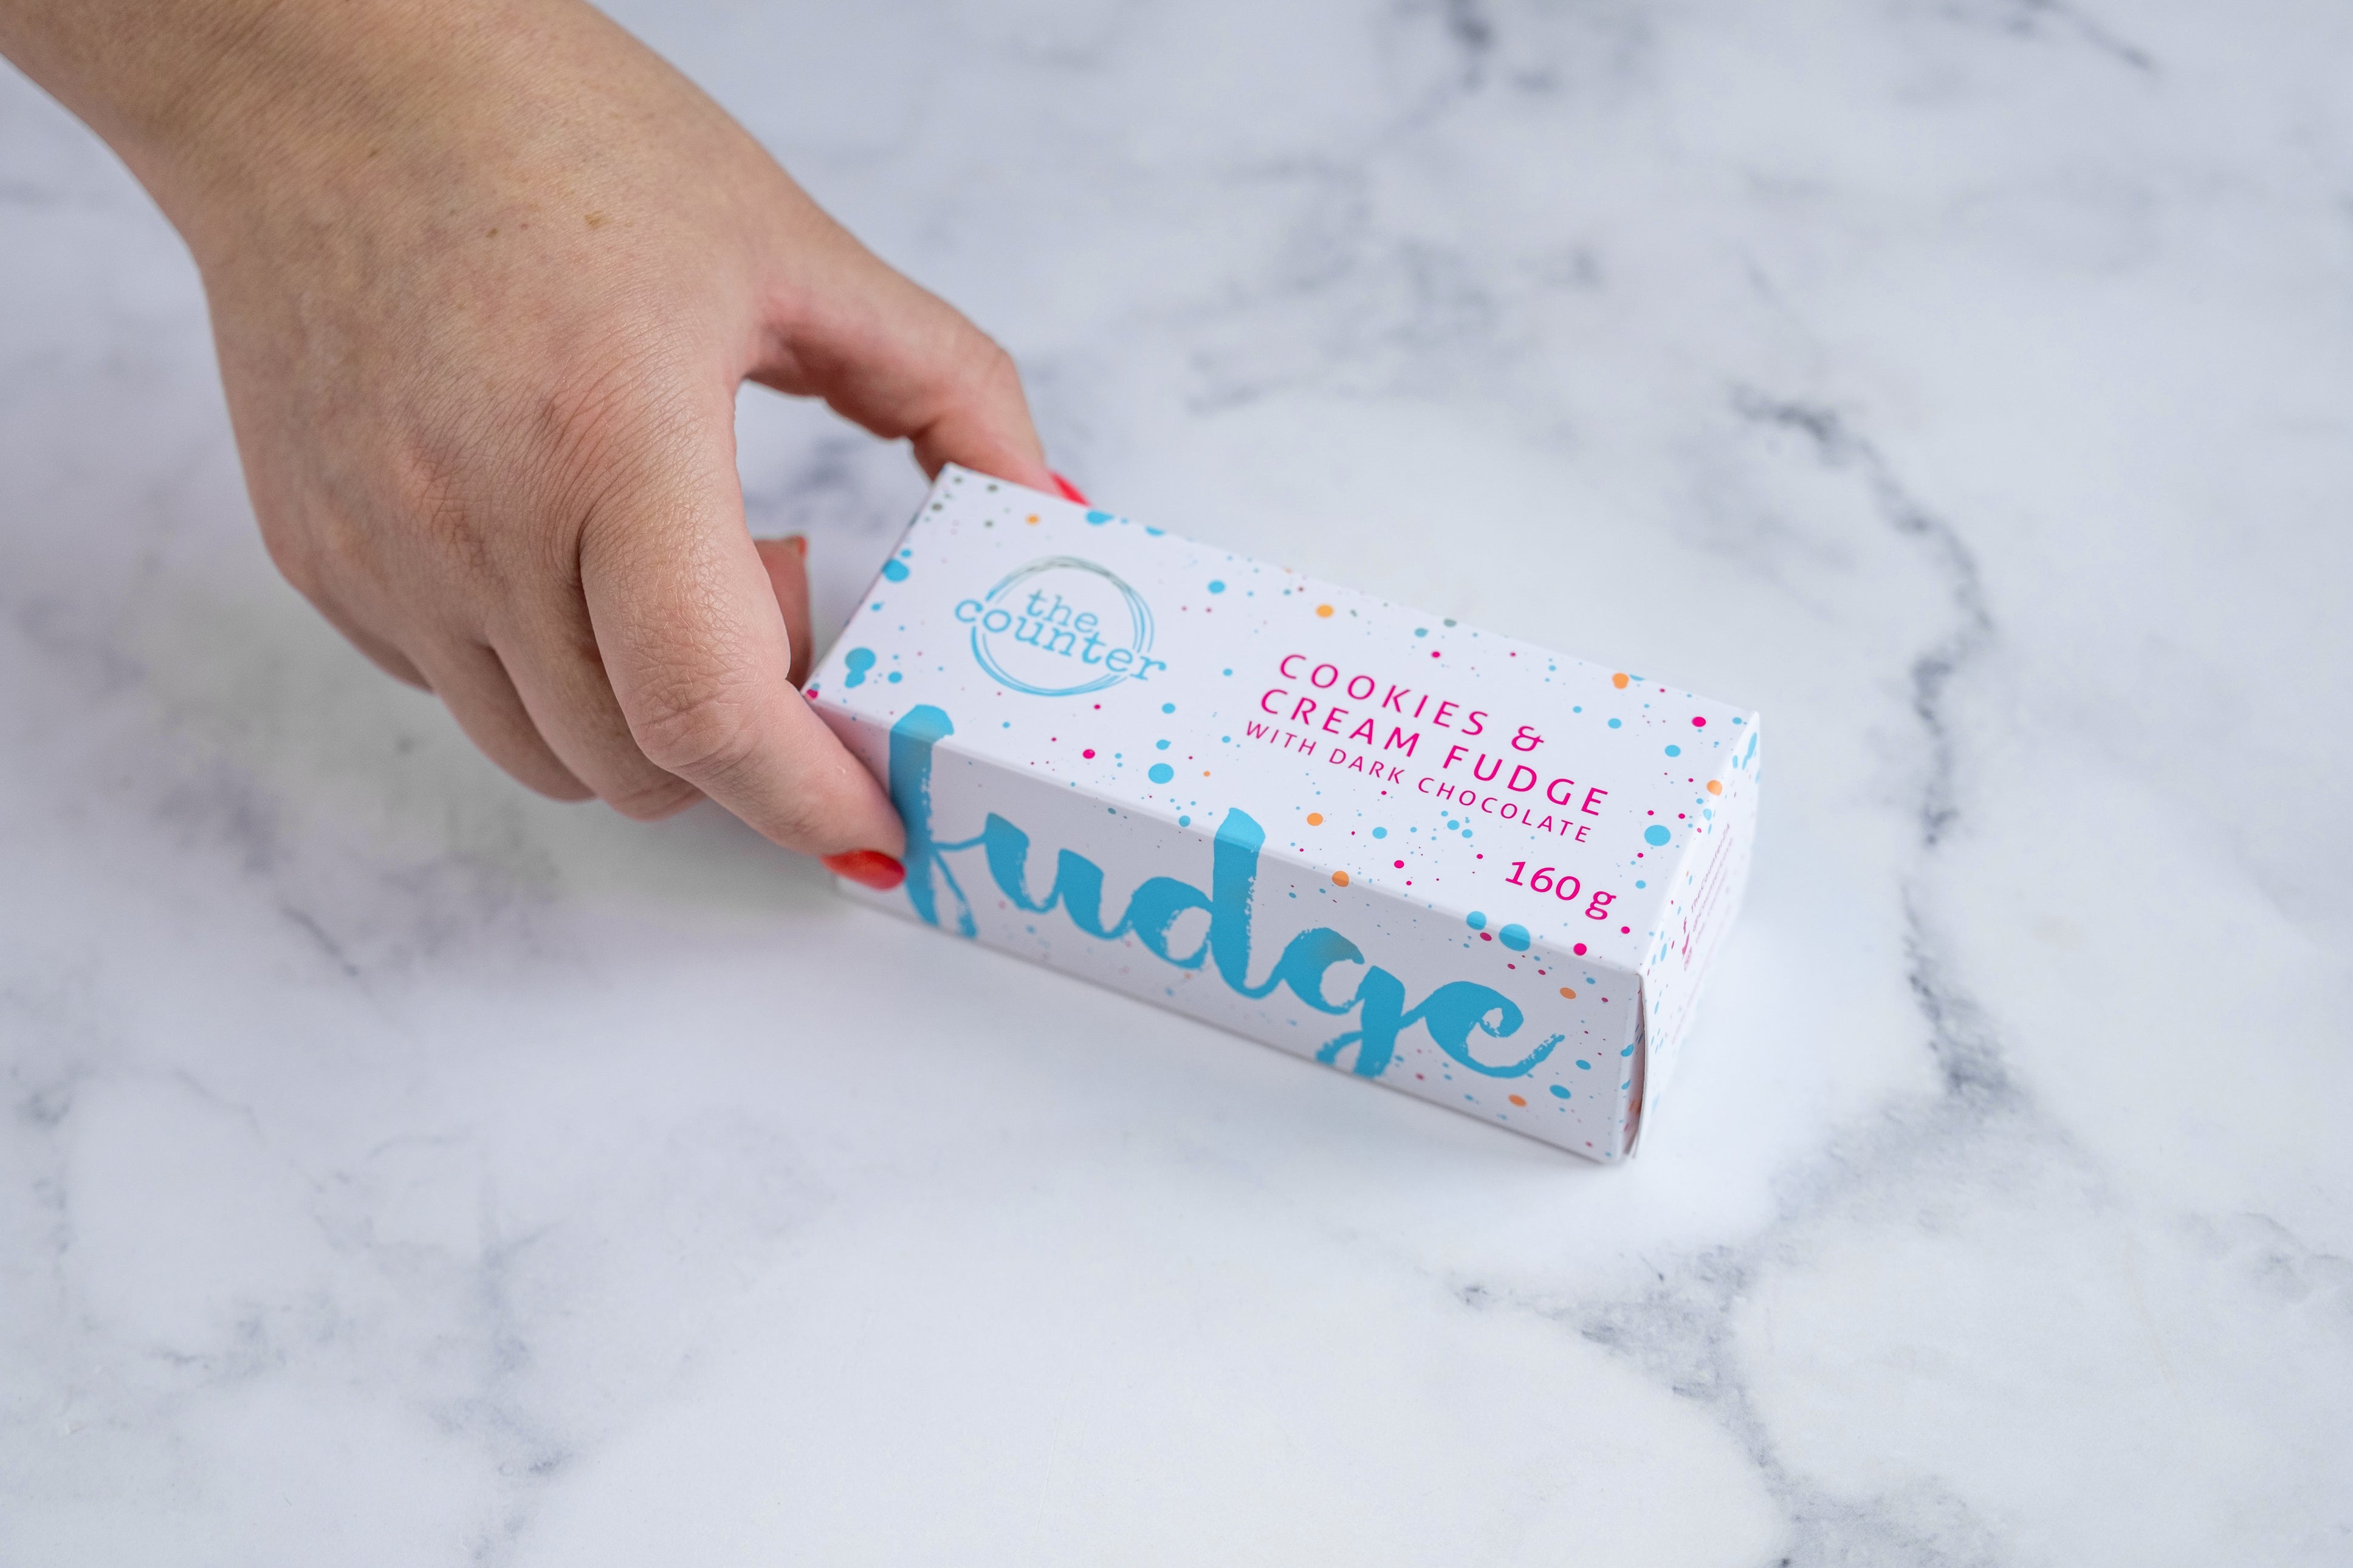 A manicured hand with red nail polish grabs a white box sitting on a neutral background. Large bright blue lettering states 'fudge' and is surrounded by bright blue and cerise pink paint splashes. A messy circled logo for The Counter and the words 'Cookies & Cream fudge with dark chocolate' are written in cerise pink block lettering.